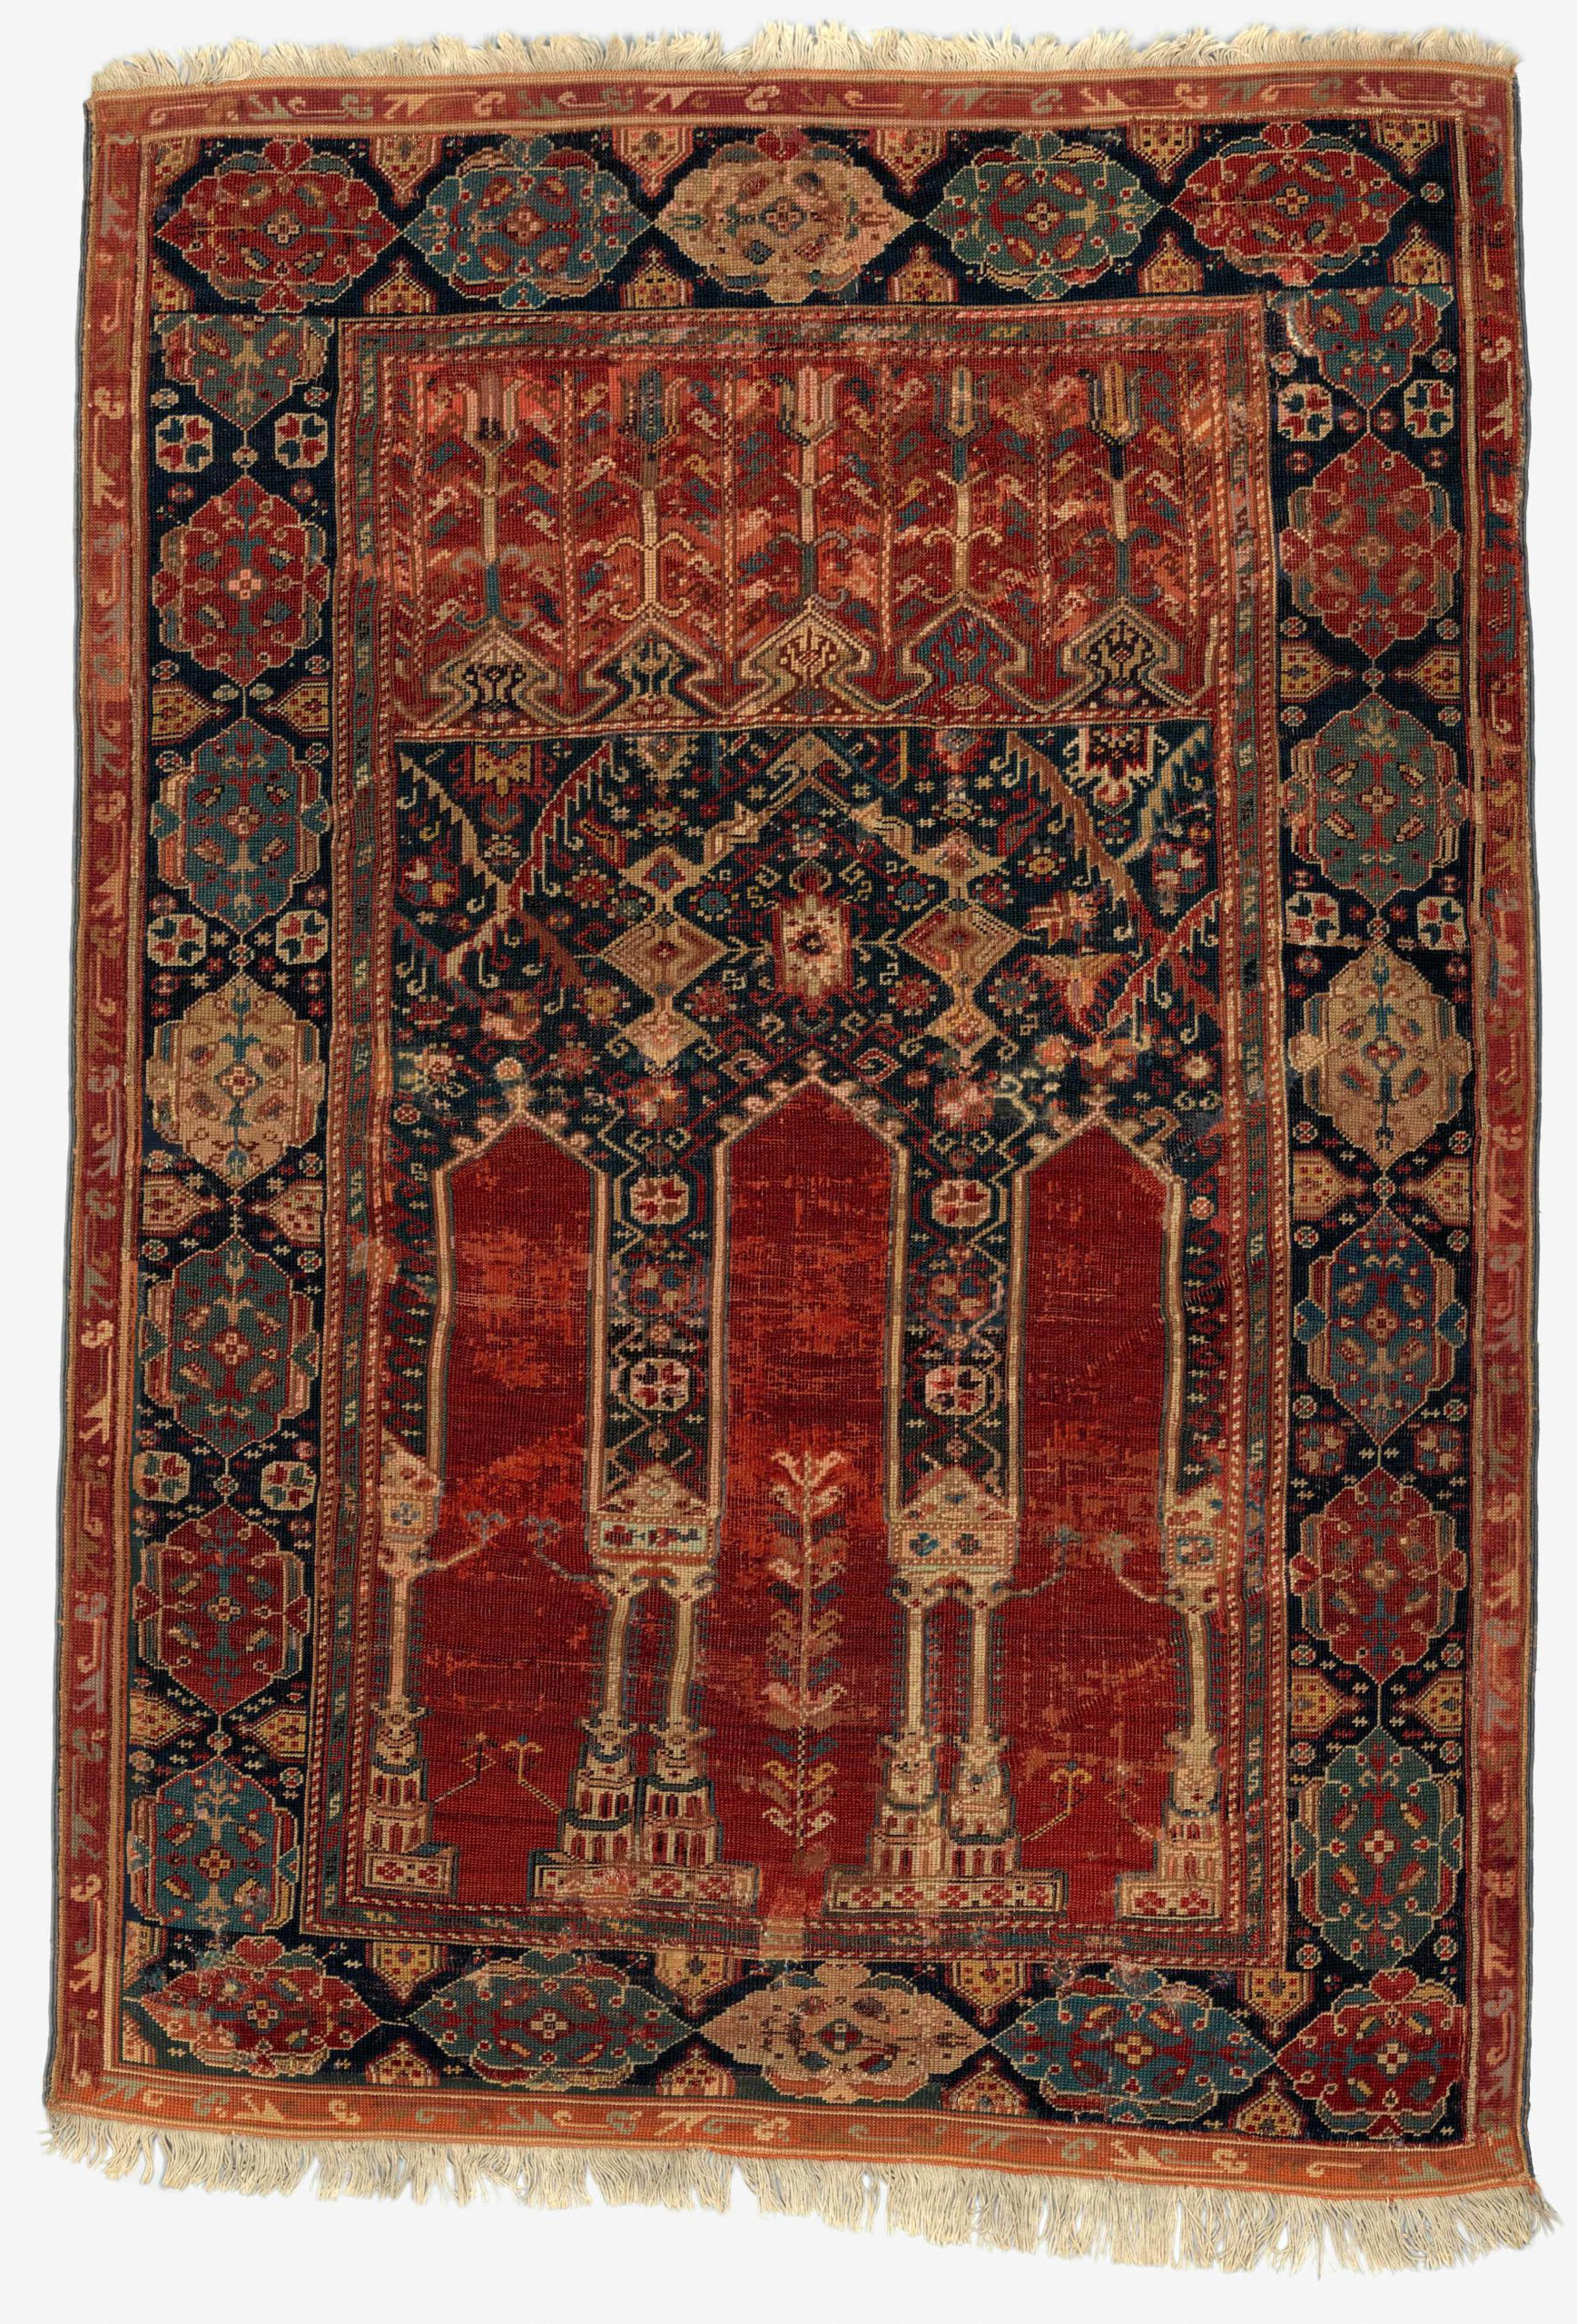 Prayer Rug with Coupled Columns, early 18th century (attributed to Turkey, probably Ladik, Konya), wool (warp, weft and pile), symmetrically knotted pile, 172.7 x 121.9 cm (The Metropolitan Museum of Art, New York)